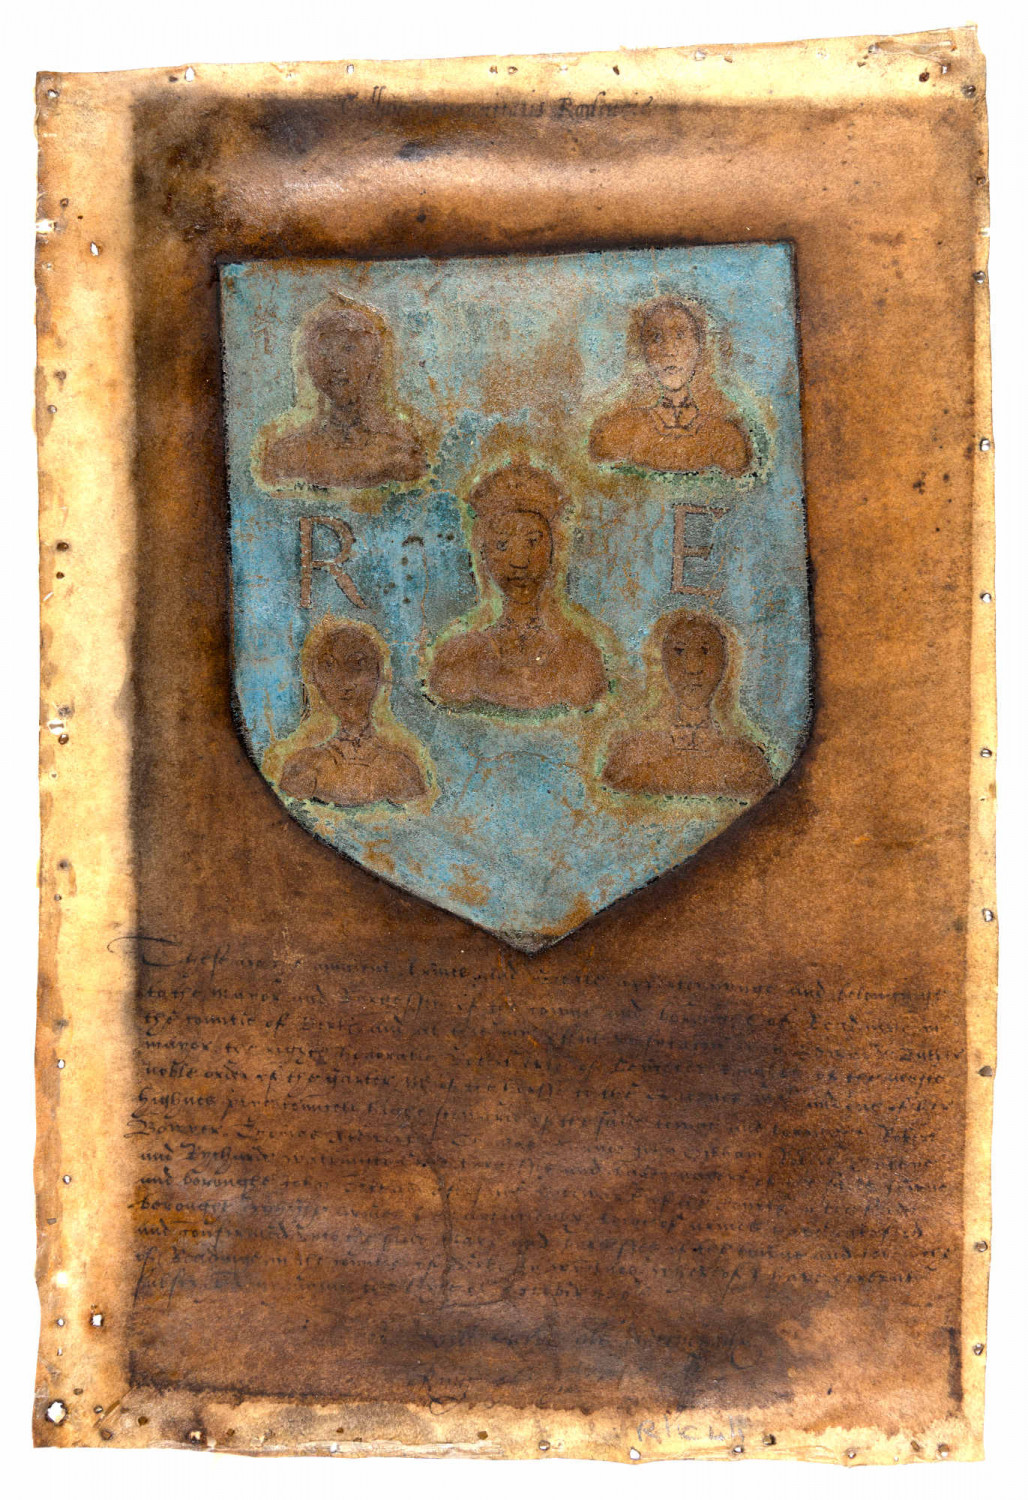 Grant of arms showing five heads from 1566. Image is discoloured with varnish.